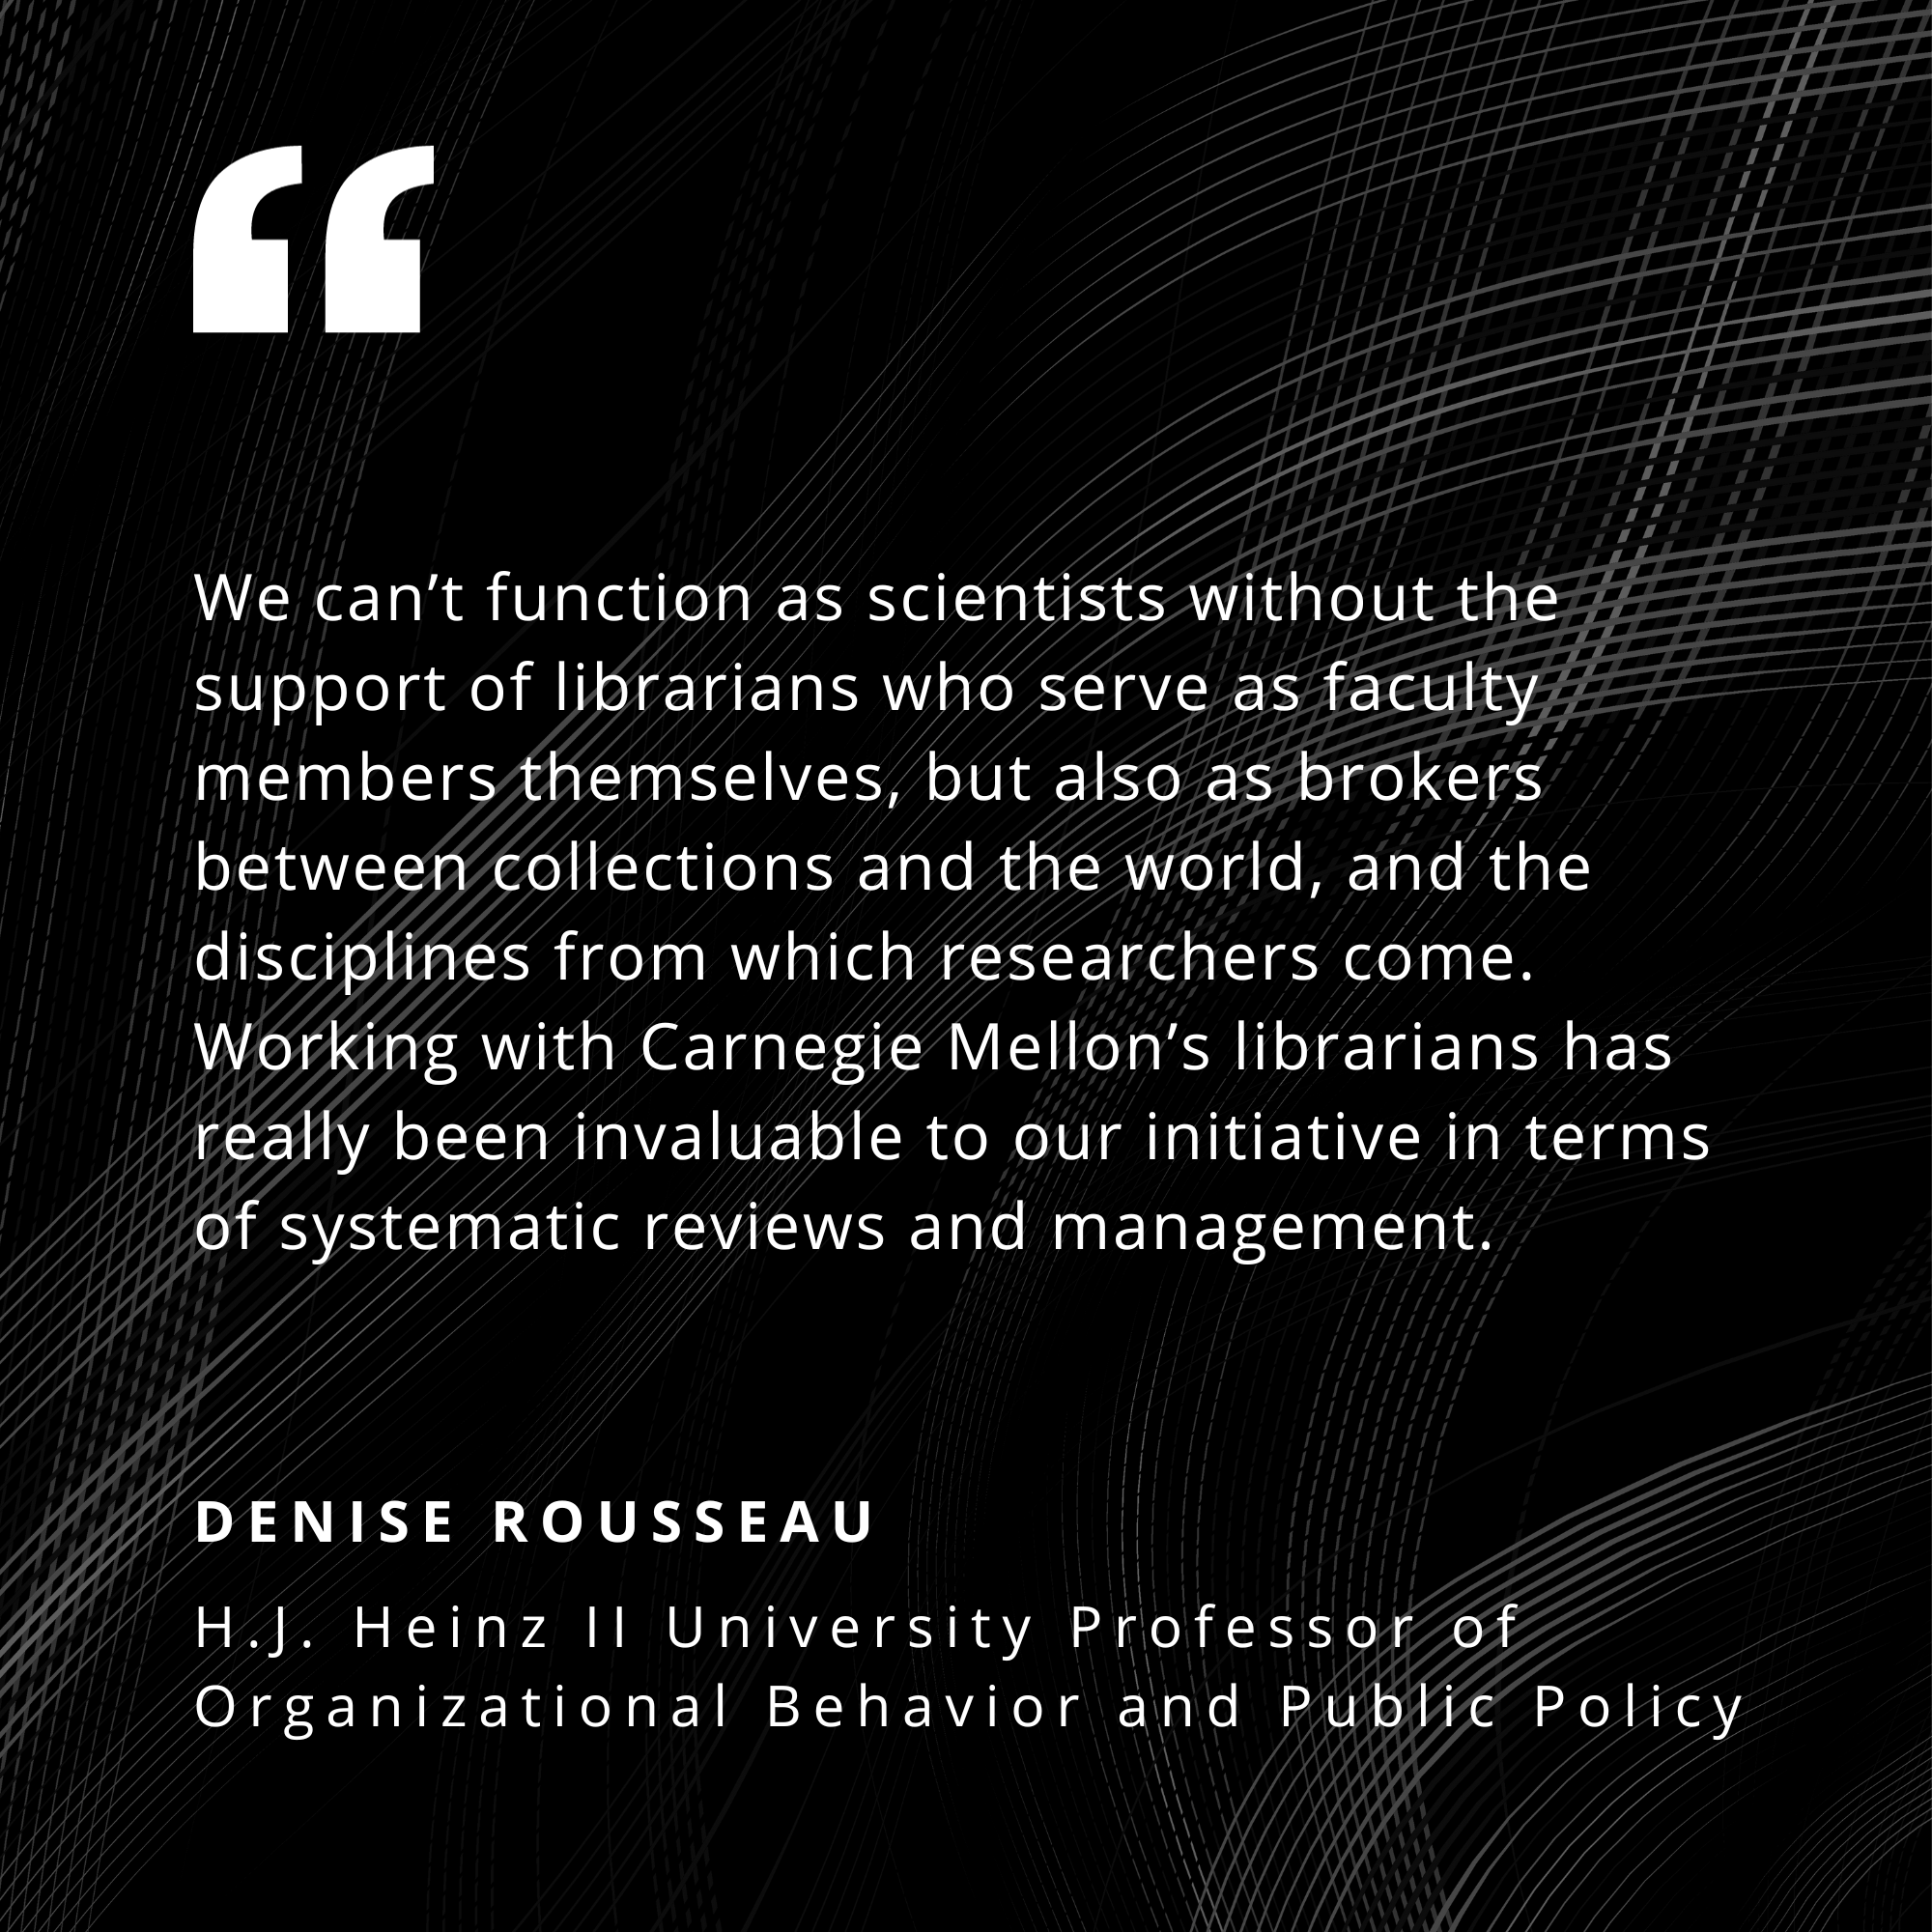 We can't function as scientists without the support of librarians who serve as faculty members themselves, but also as brokers between collections and the world, and the disciplines from which researchers come. Working with Carnegie Mellon's librarians has really been invaluable to our initiative in terms of systematic reviews and management.